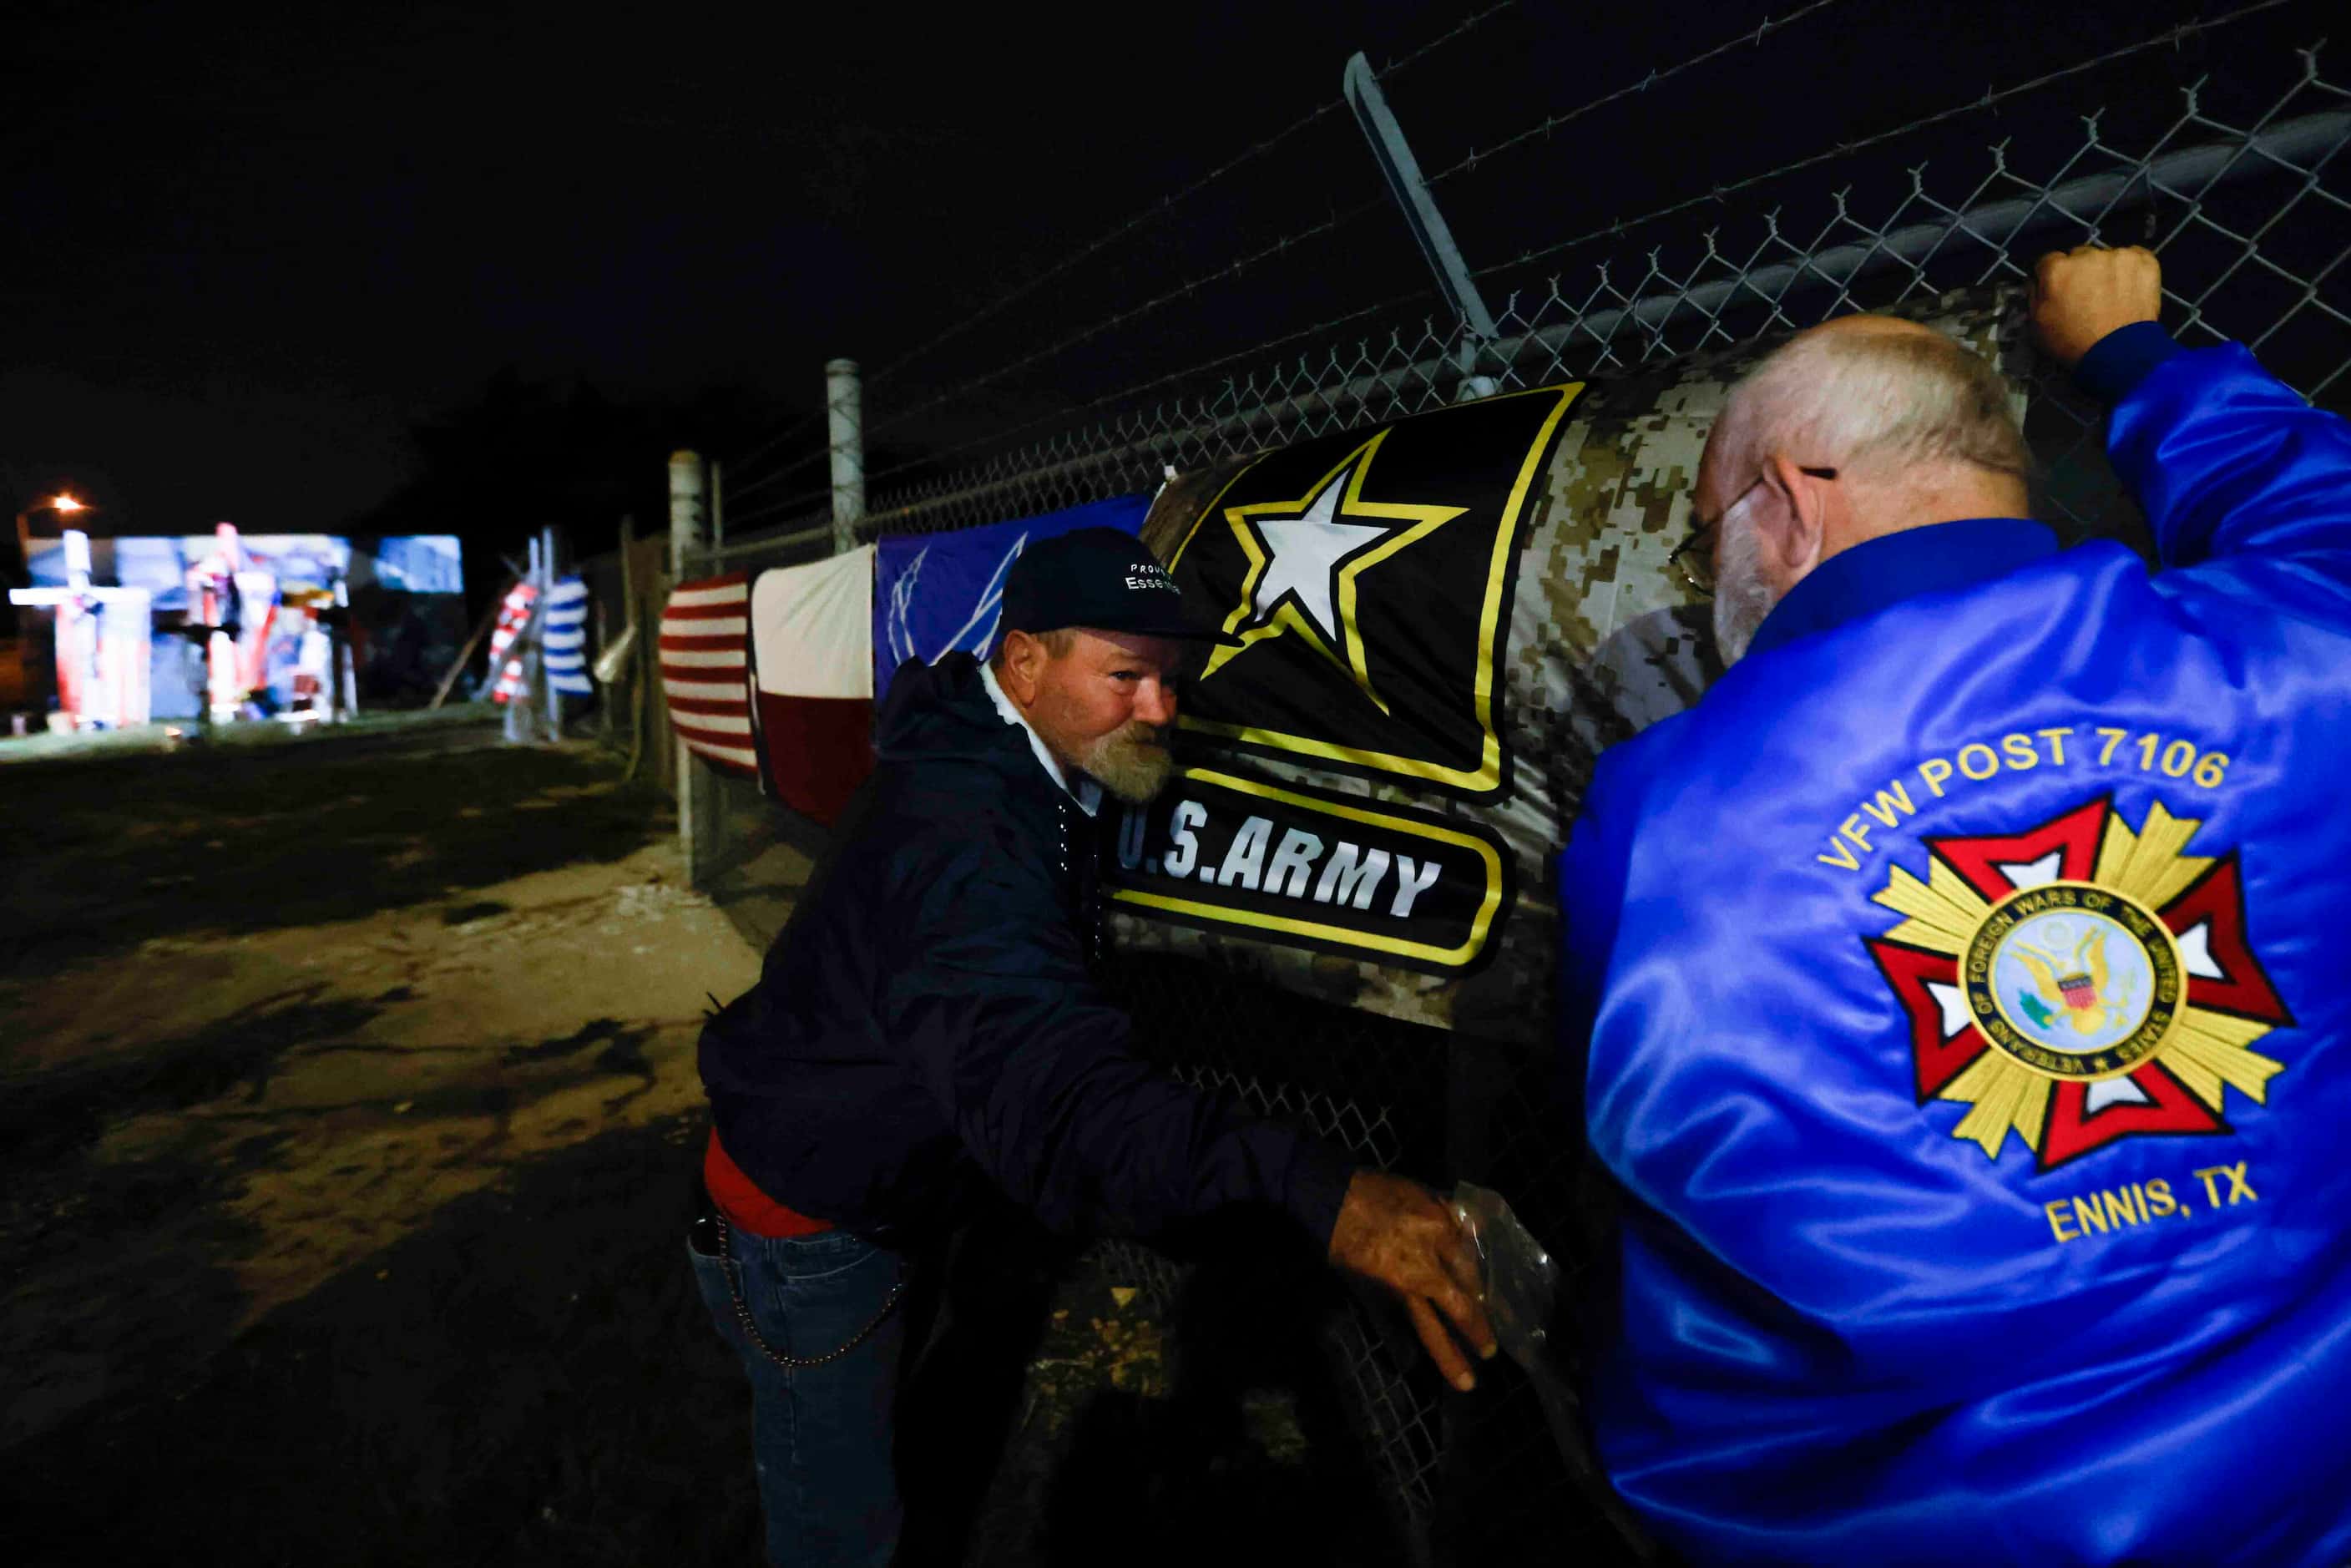 David, 59, and Glenn Coleman, 60, put up a U.S Army flag along the fence line of the Dallas...